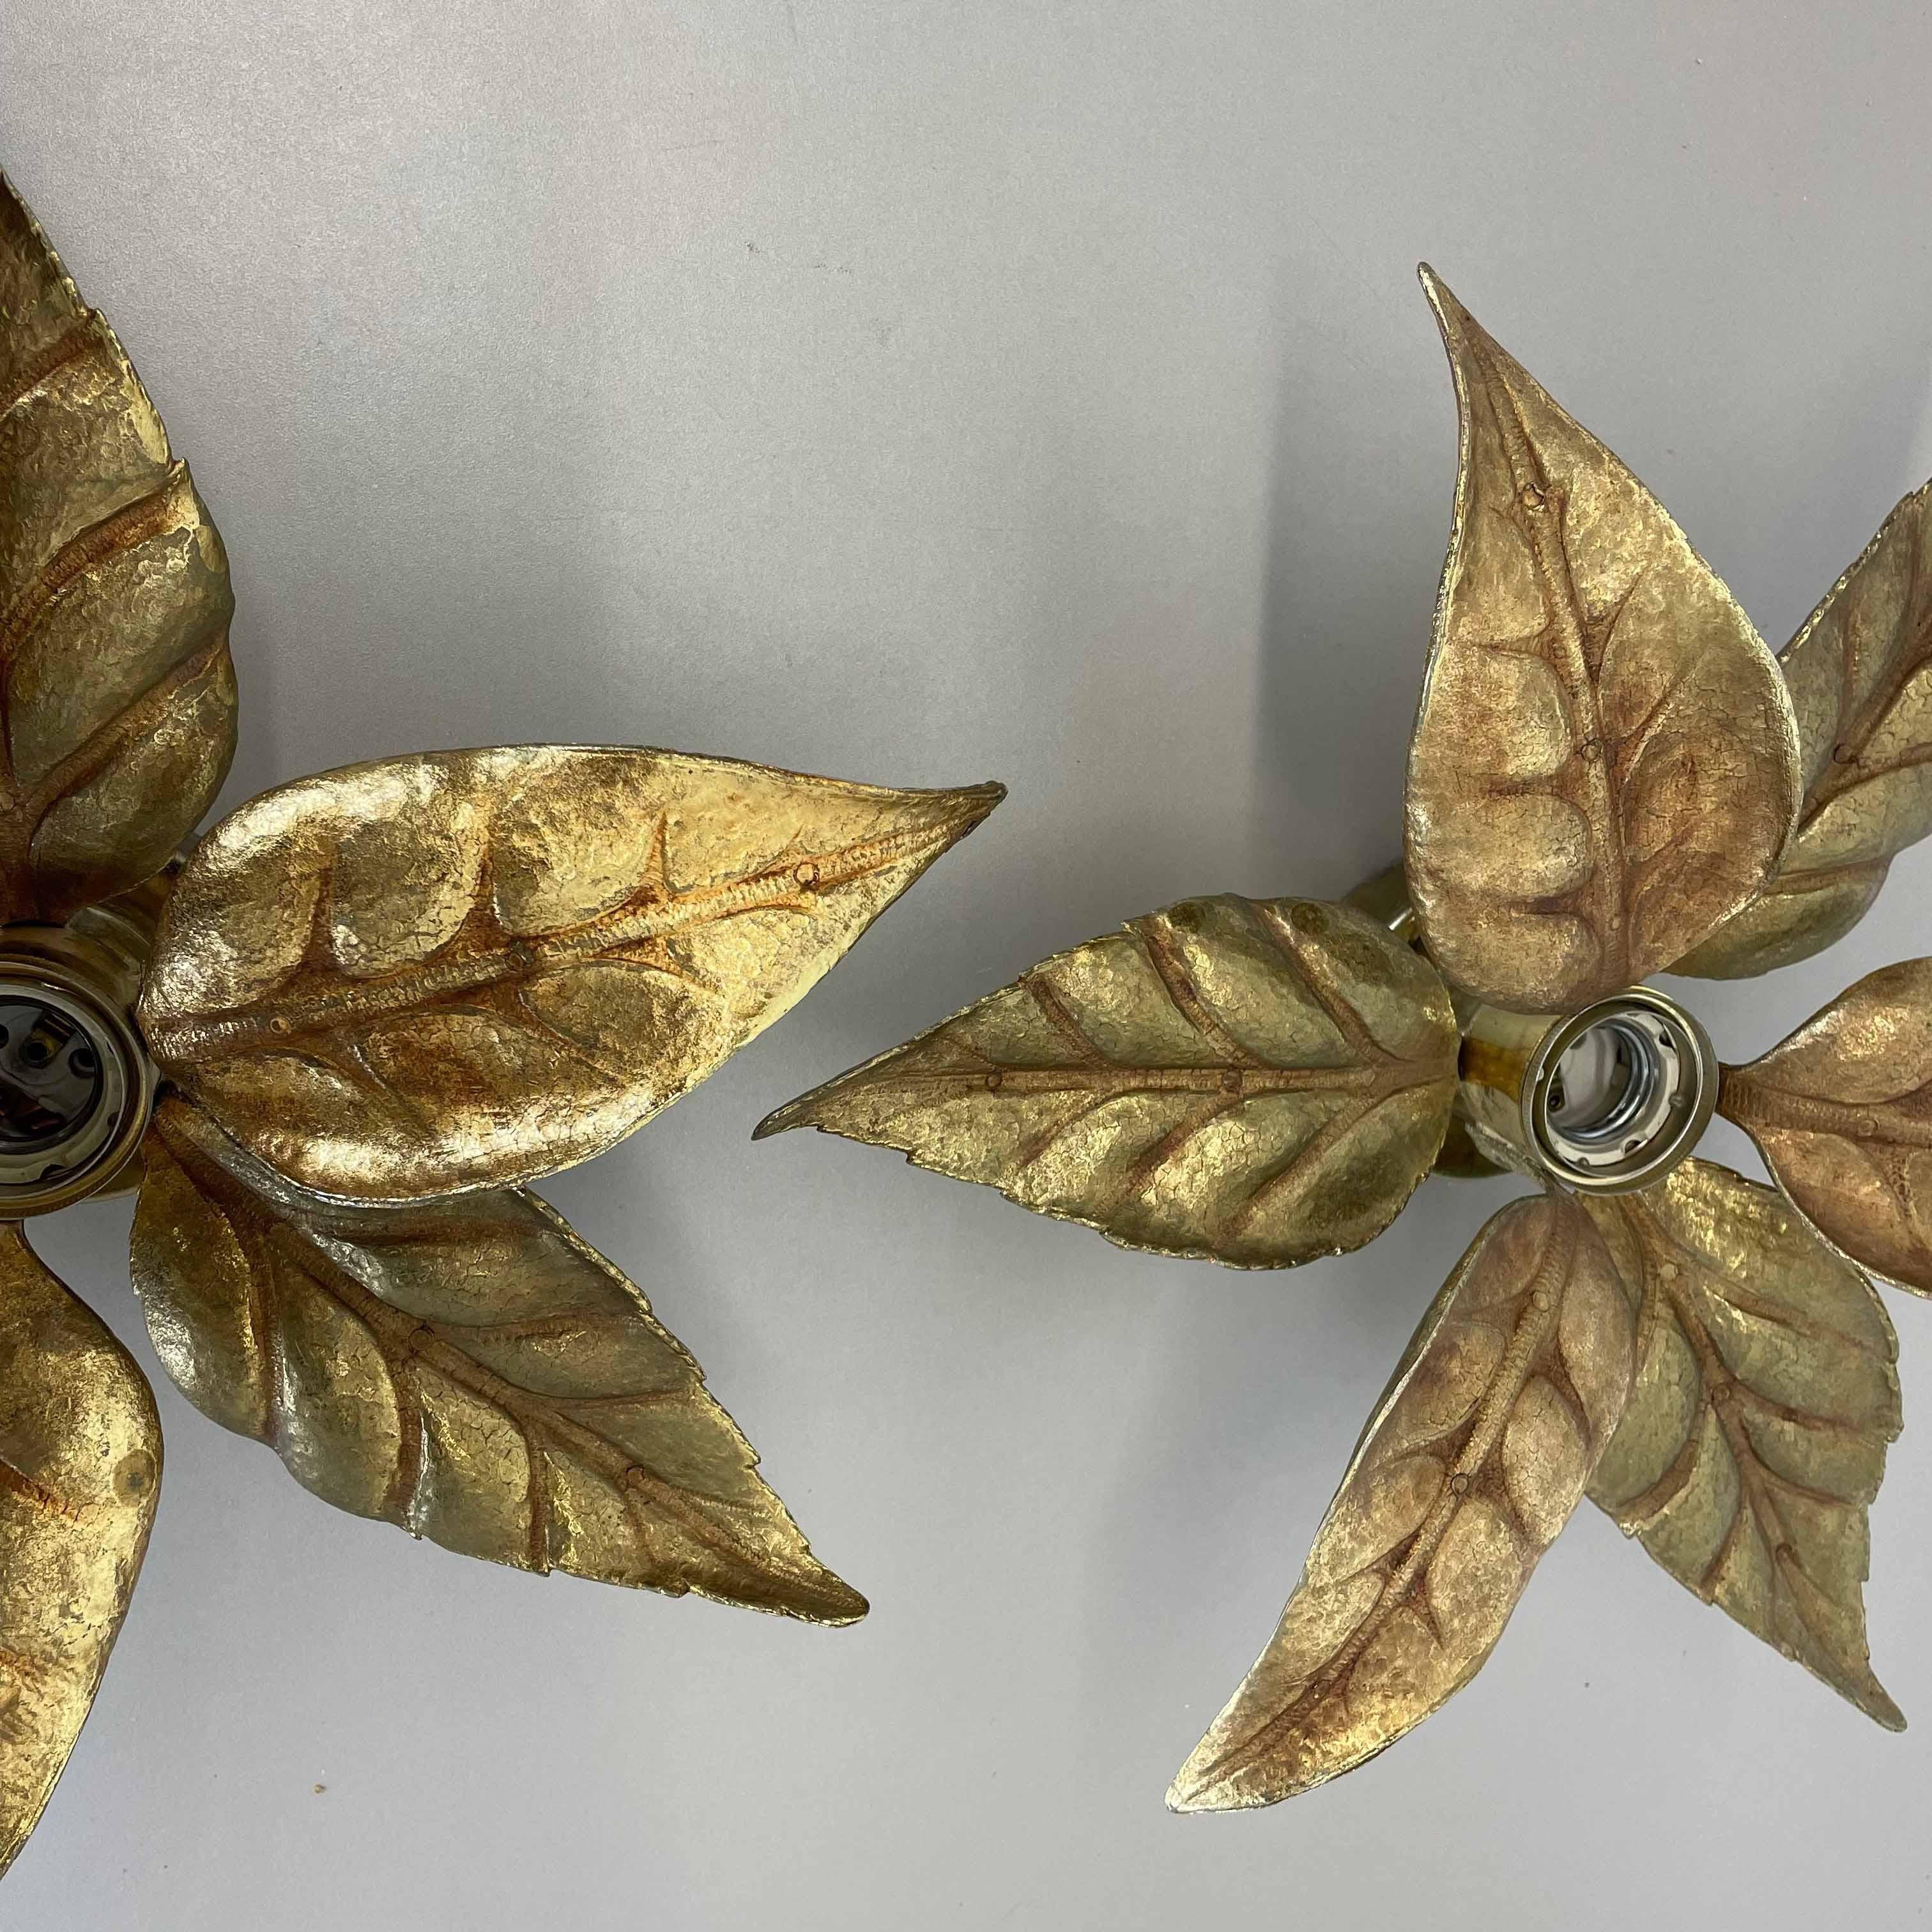 Set of 2 Floral Brutalist Brass Metal Wall Ceiling Light by Willy Daro, Belgium 1